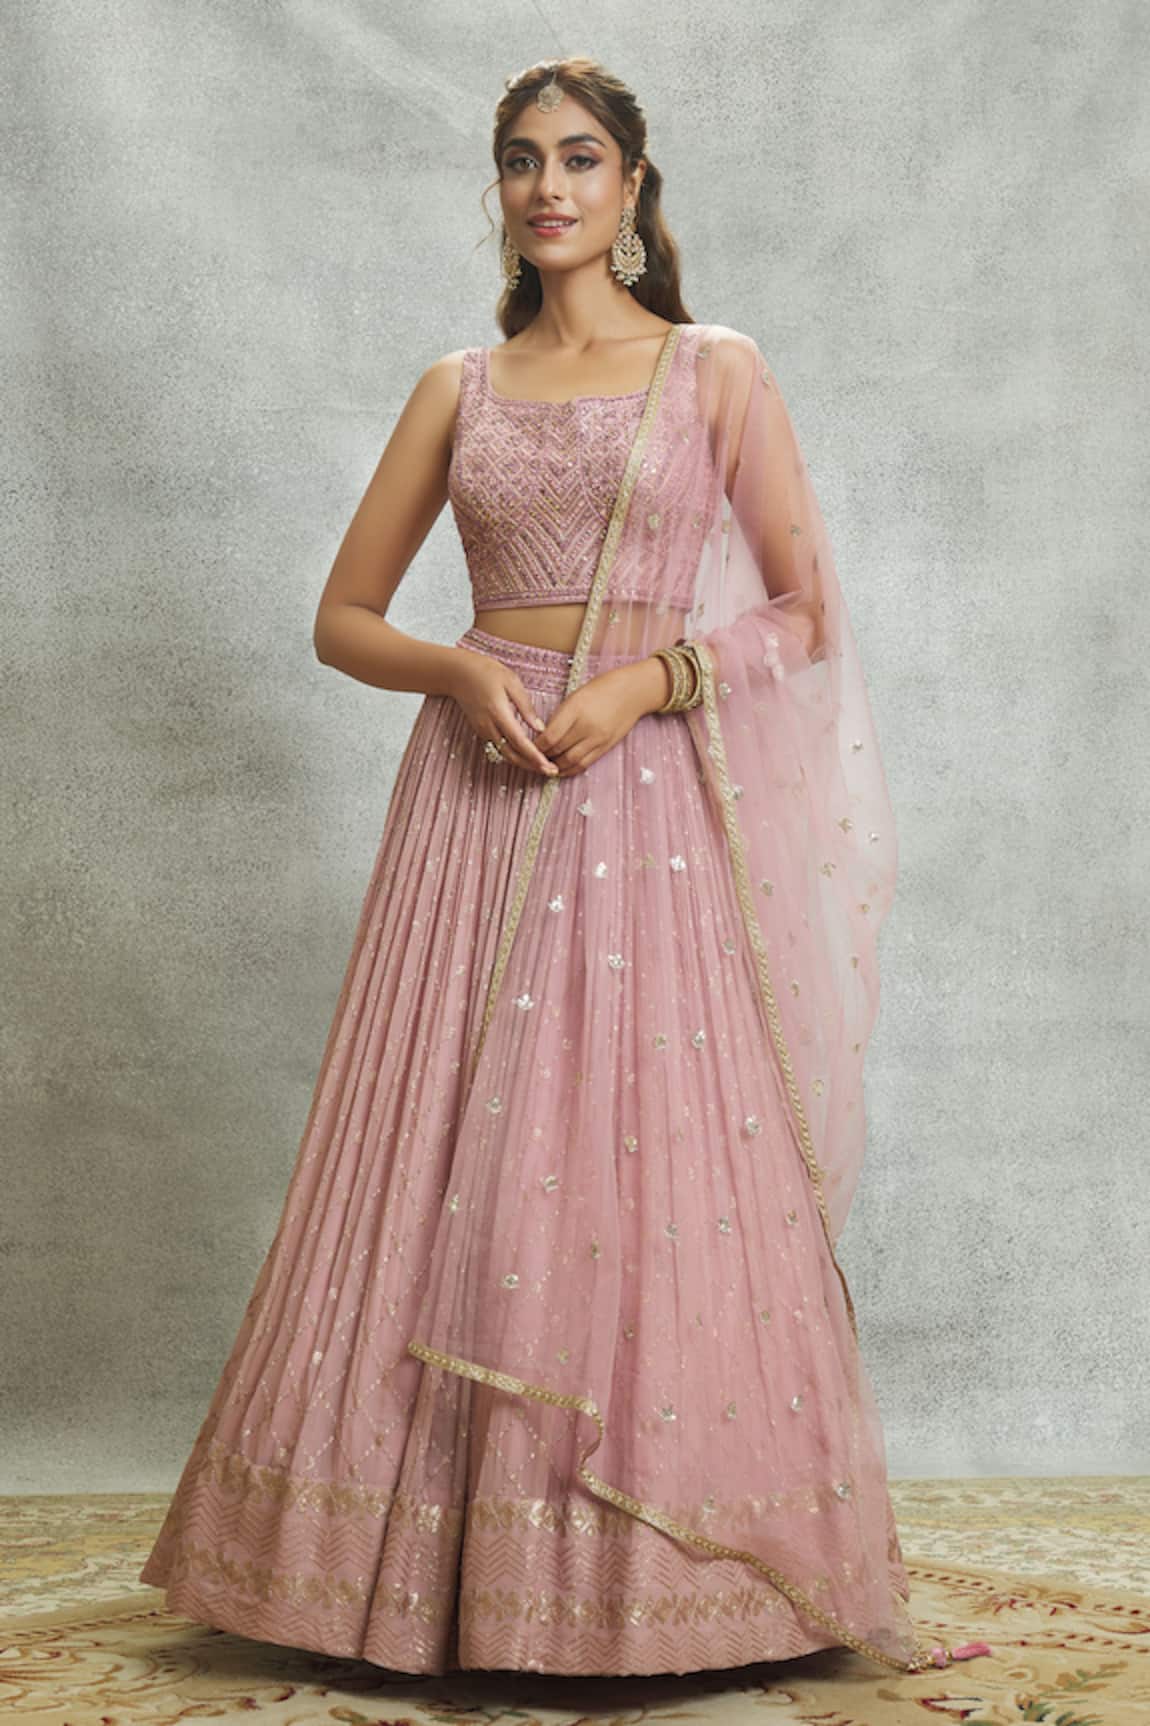 The Latest Lancha Dress Designs Are Here To Take Your Breath Away | Bridal  outfits, Beautiful outfits, Dress images